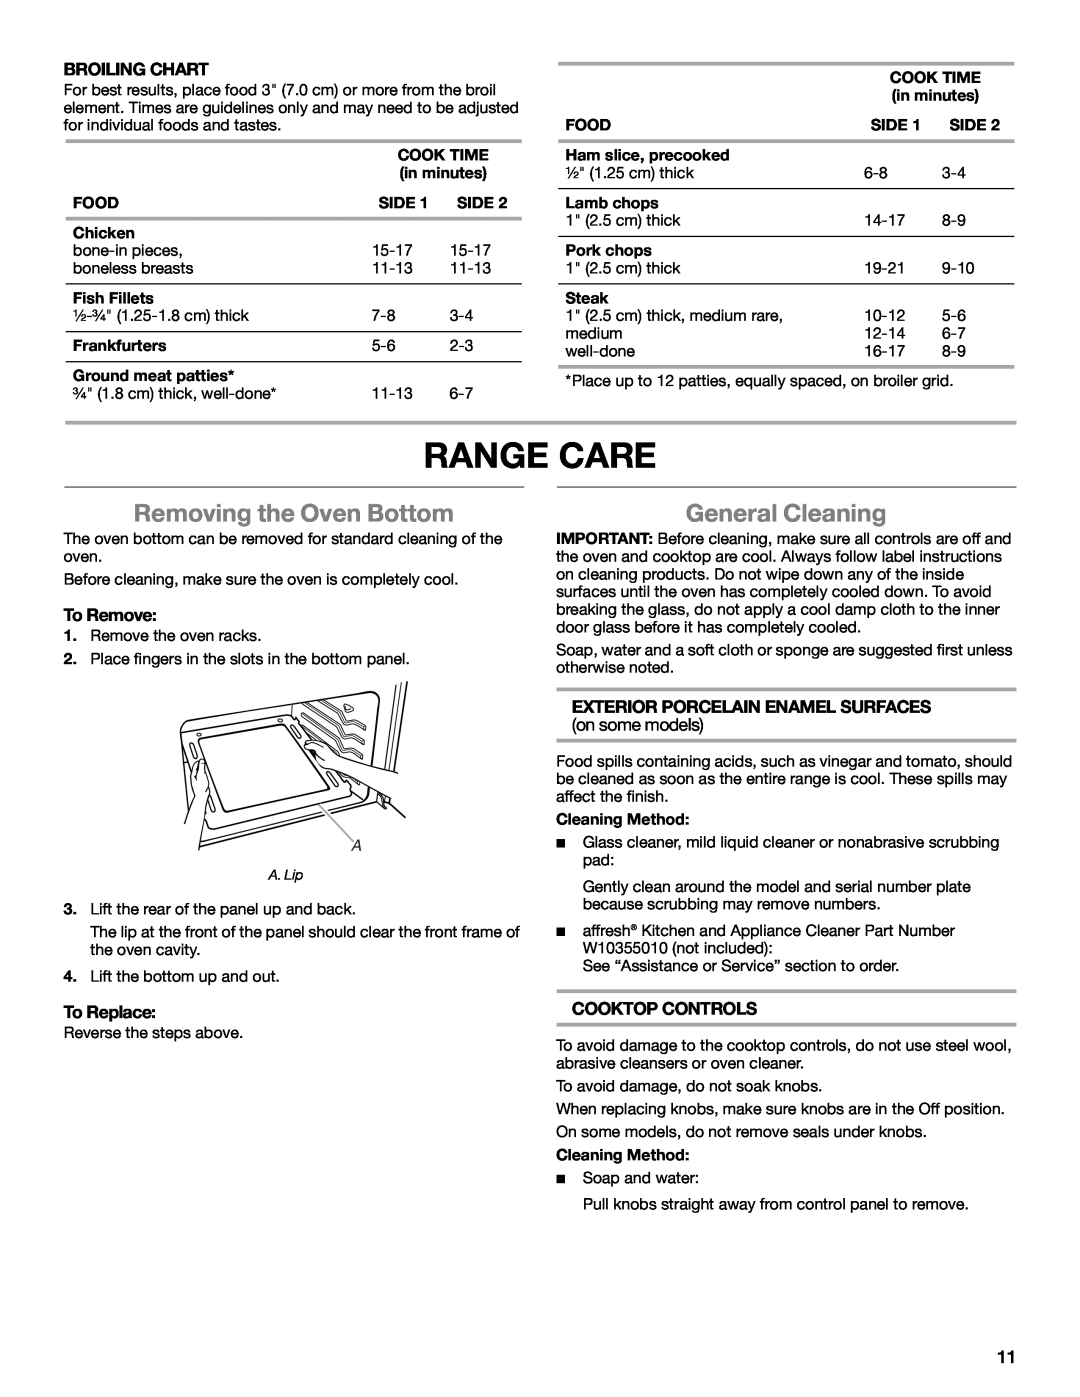 Amana W10531343A manual Range Care, Removing the Oven Bottom, General Cleaning, Broiling Chart, To Remove, To Replace 